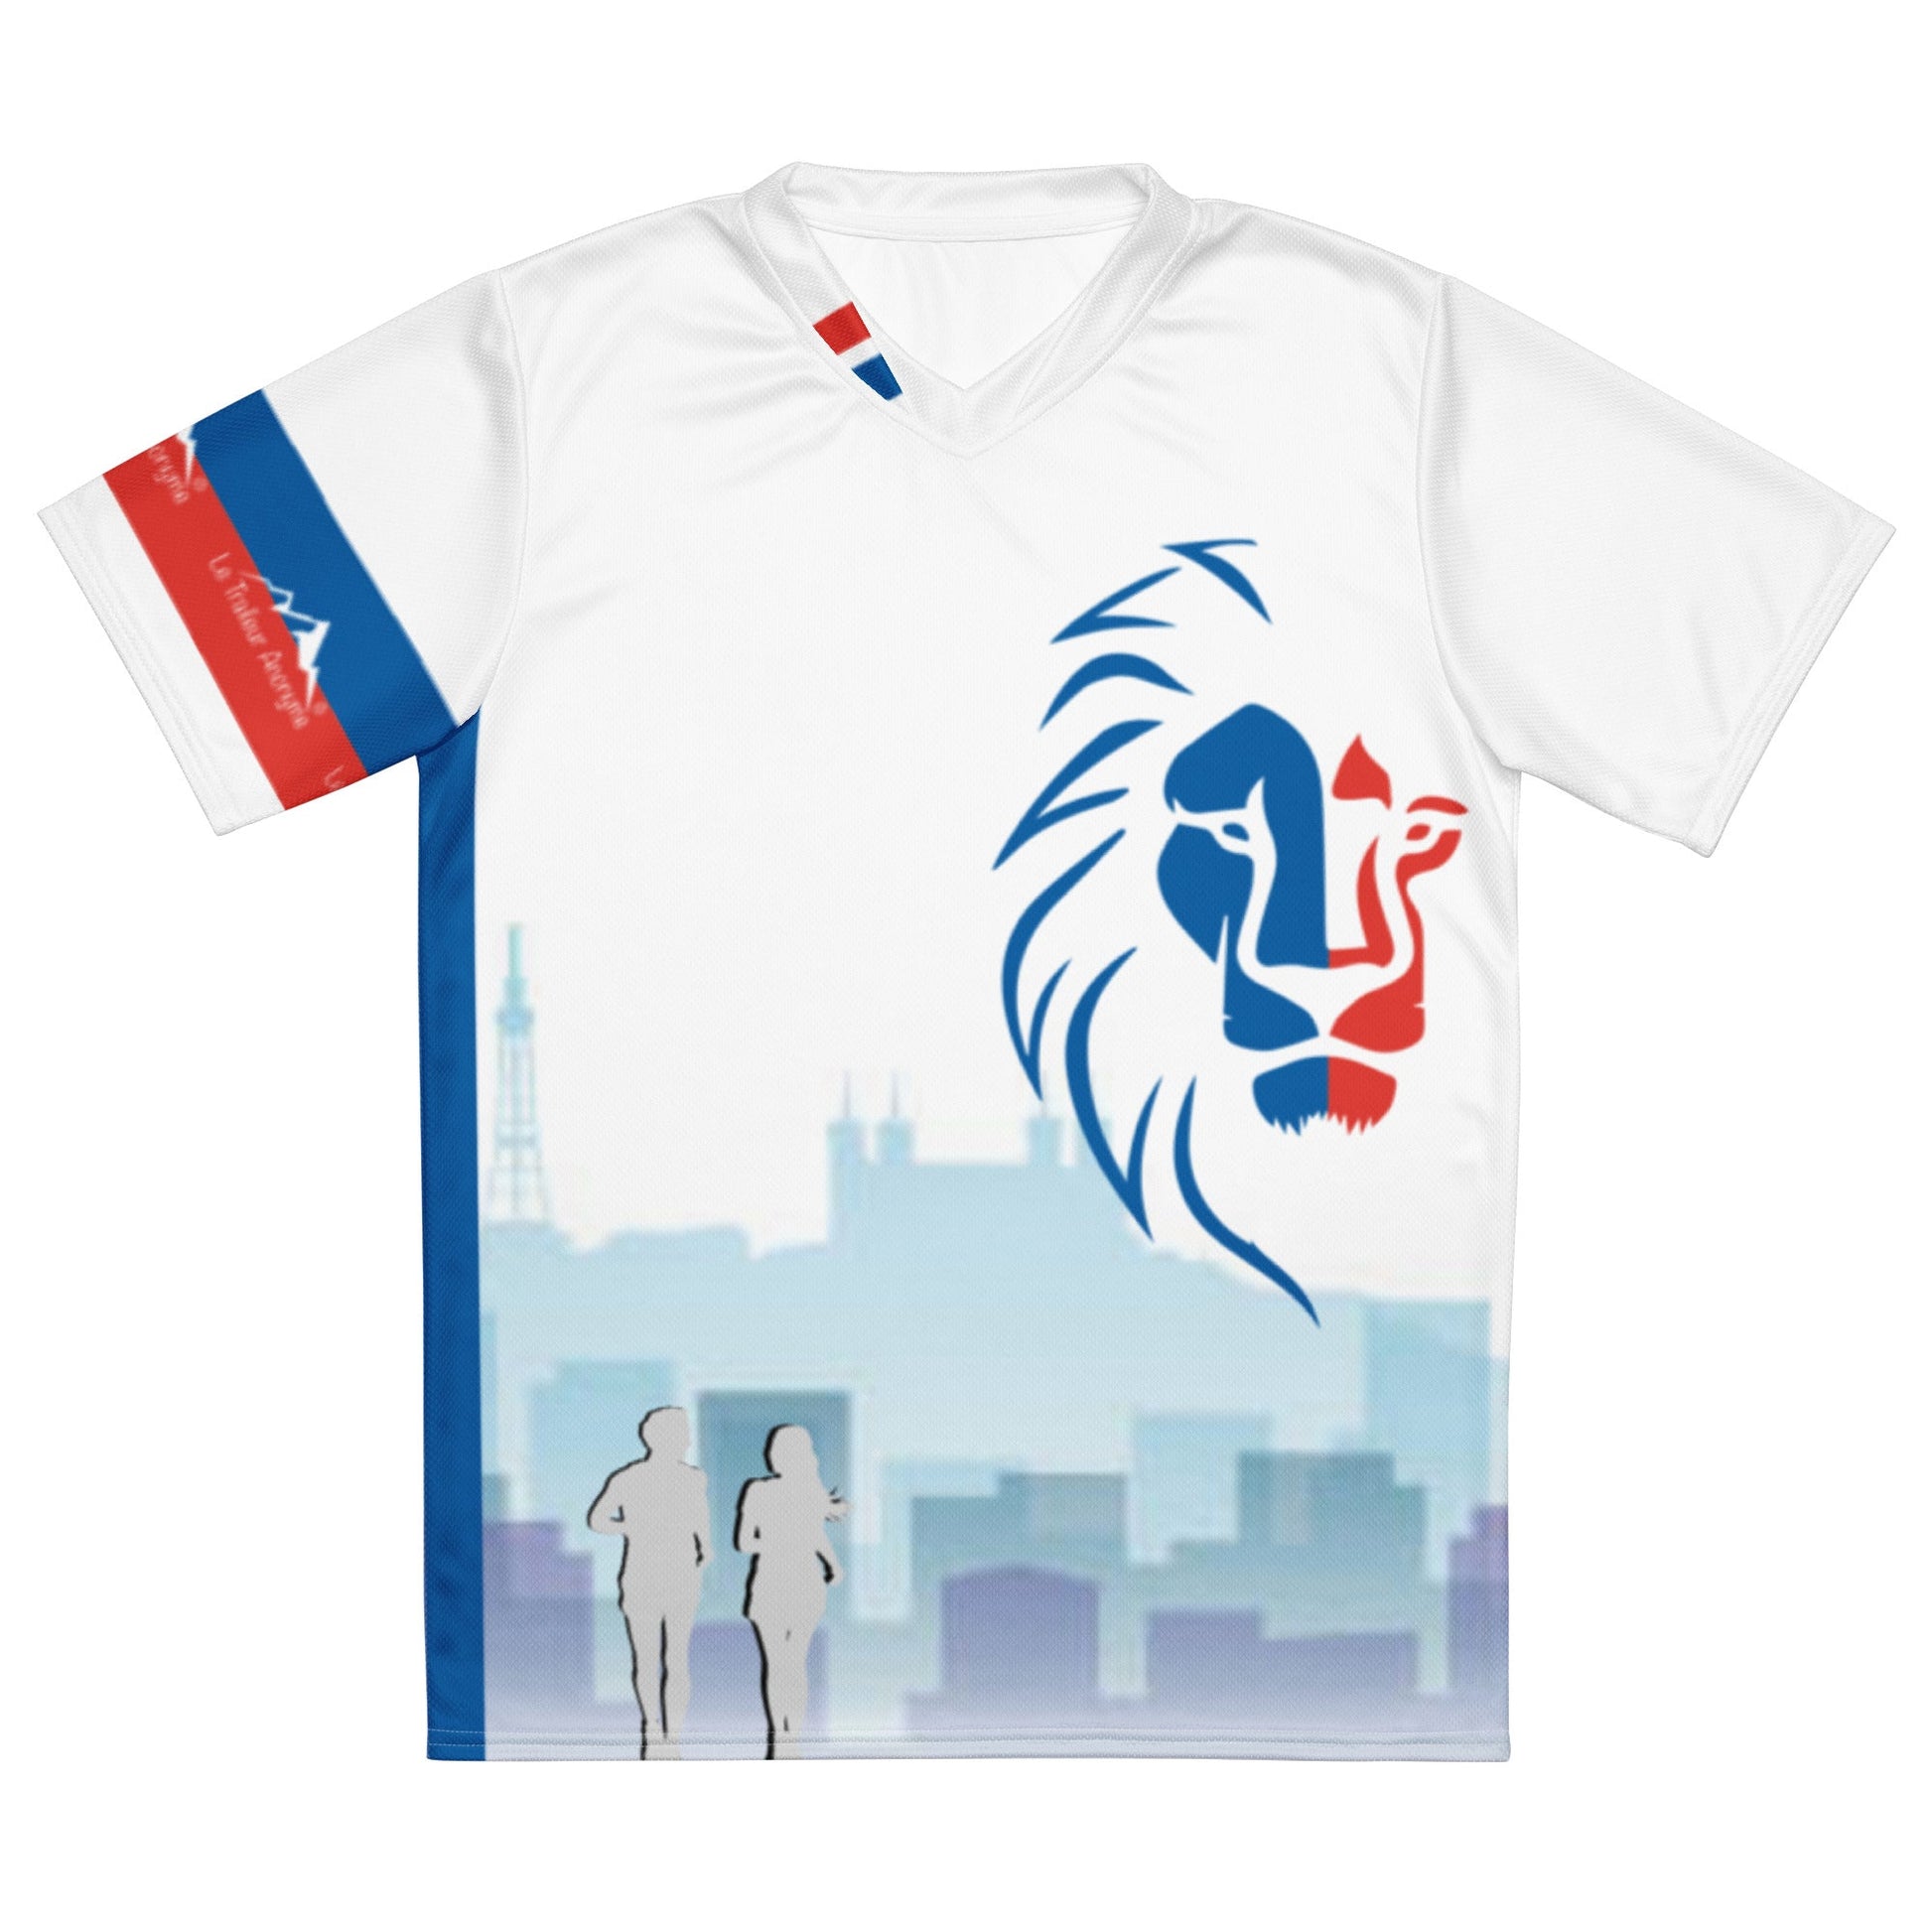 Maillot Running - Lyon City - Personnalisation - Le Traileur Anonyme